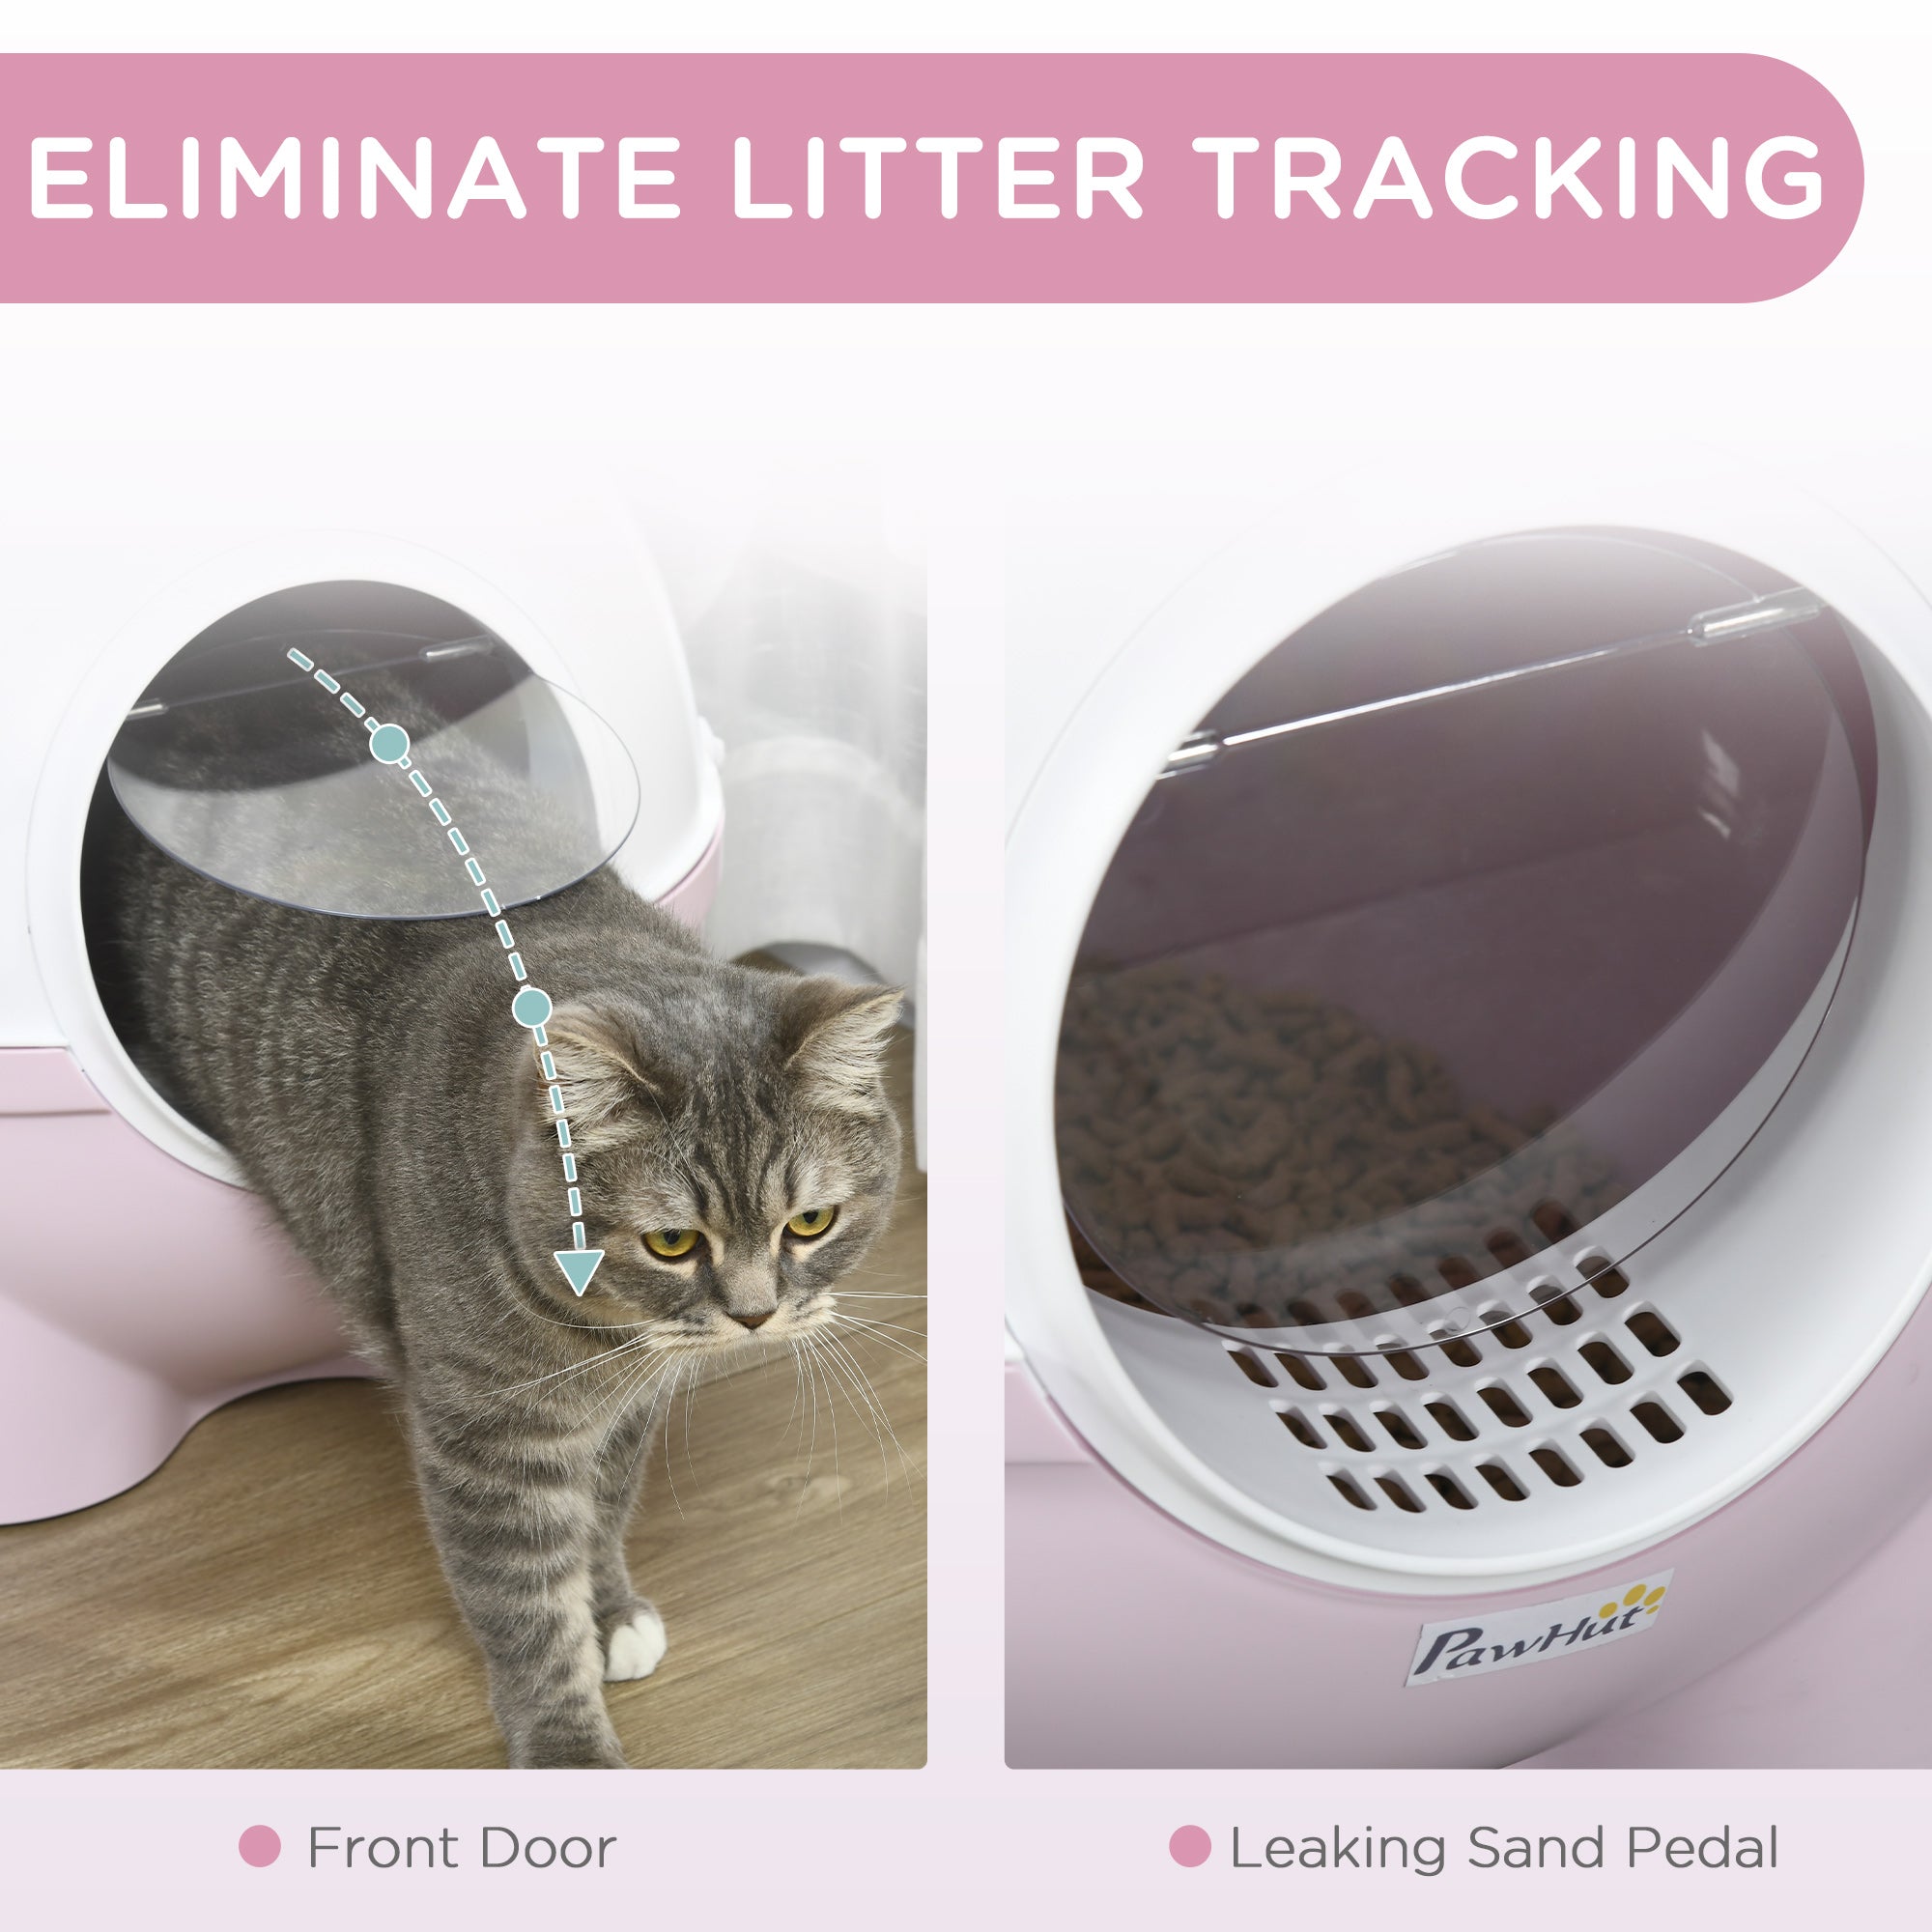 PawHut Hooded Cat Litter Box, Large Litter Tray with Lid, Scoop, Top Handle, and Front Entrance, 53 x 51 x 48cm, Pink